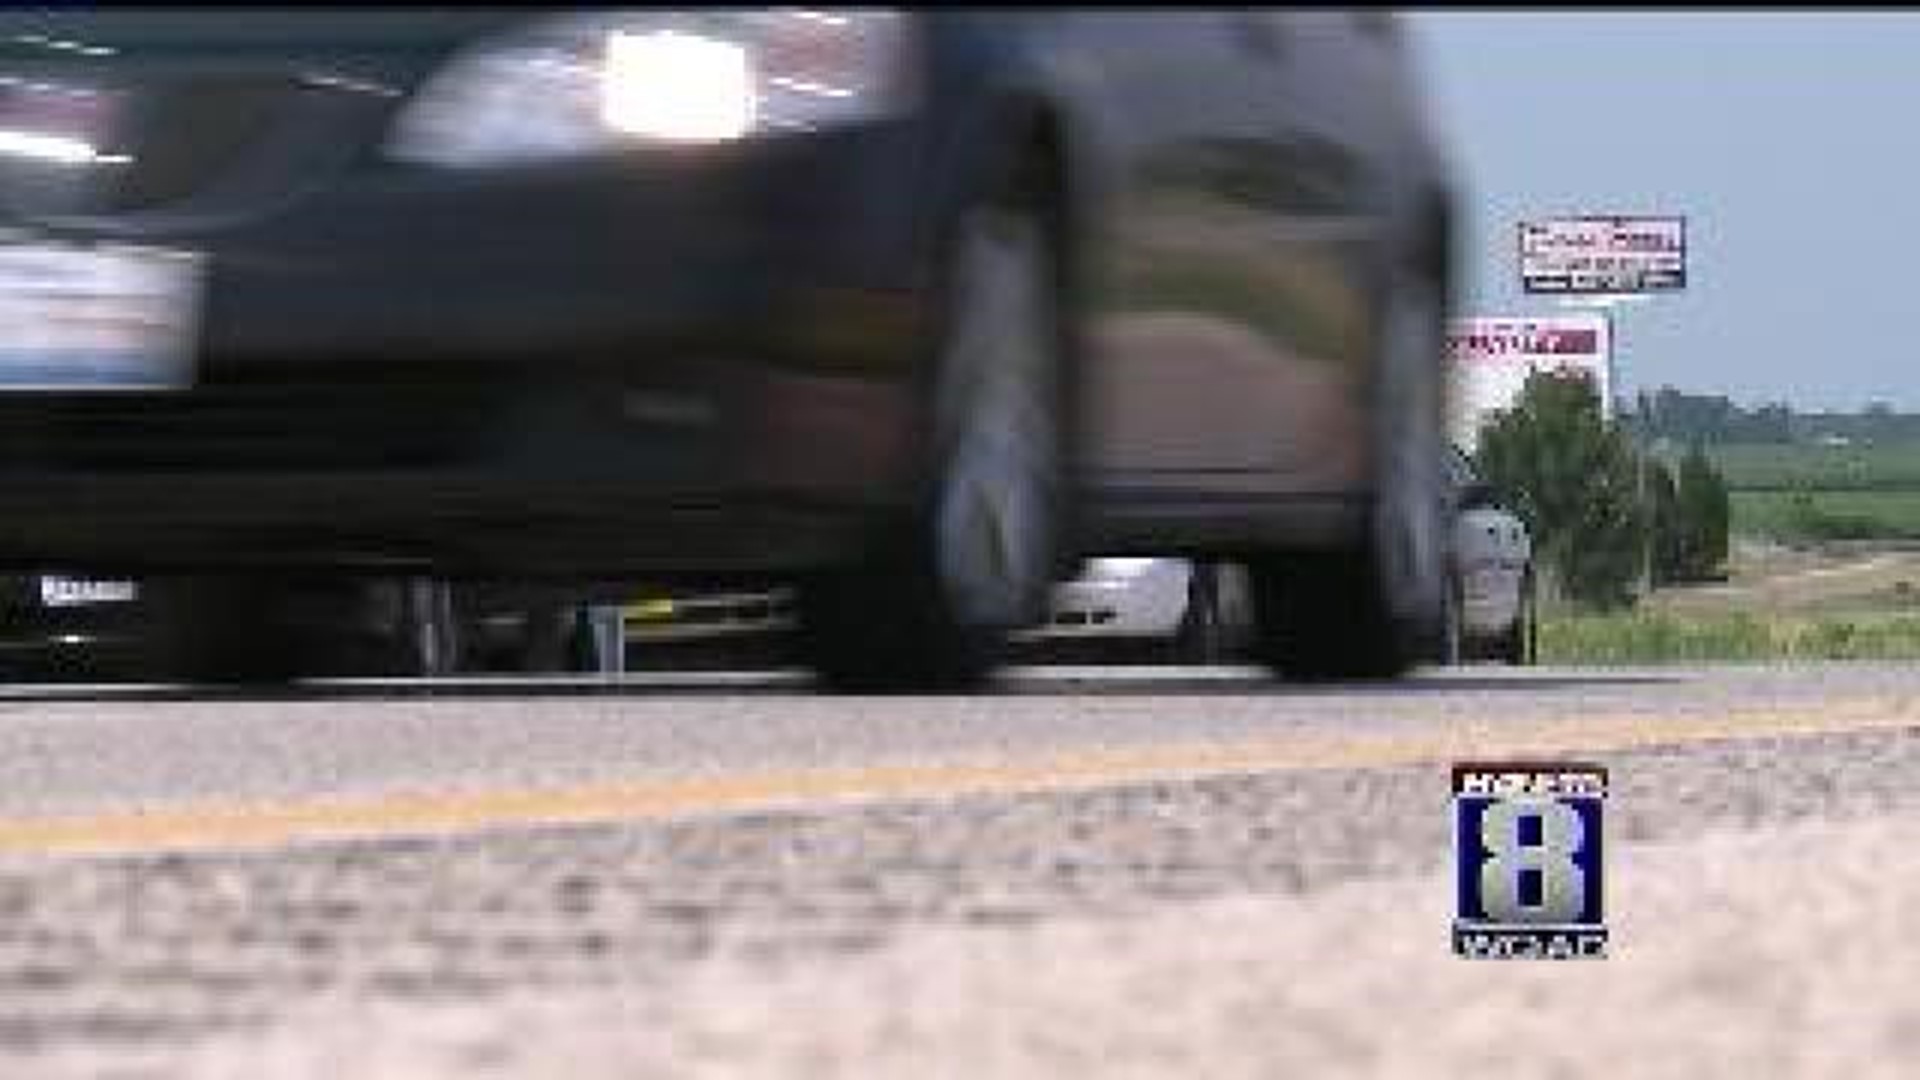 Move Over Law Changes in Iowa